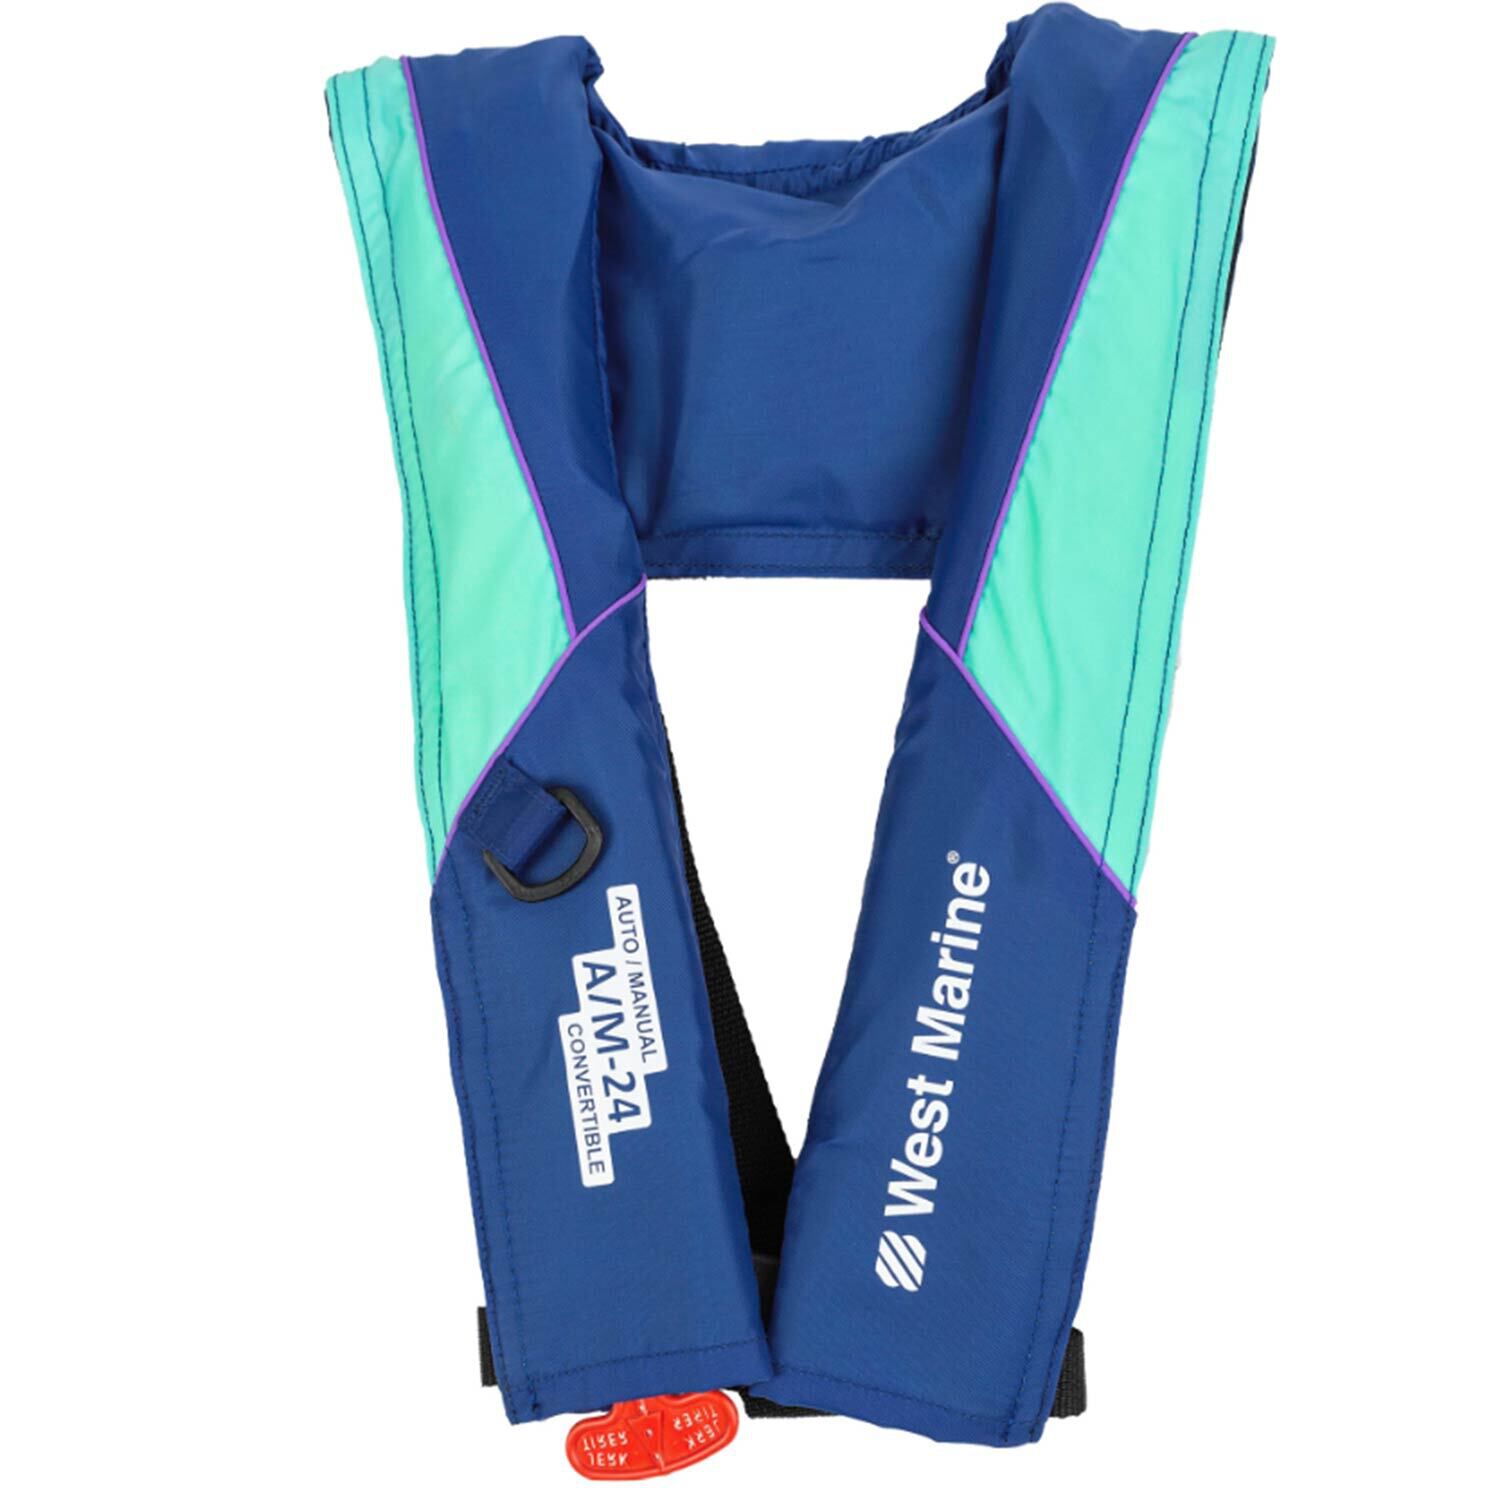 Hot Adults Automatic Inflatable Life Jacket Inflation 150N Survival Sailing Vest 